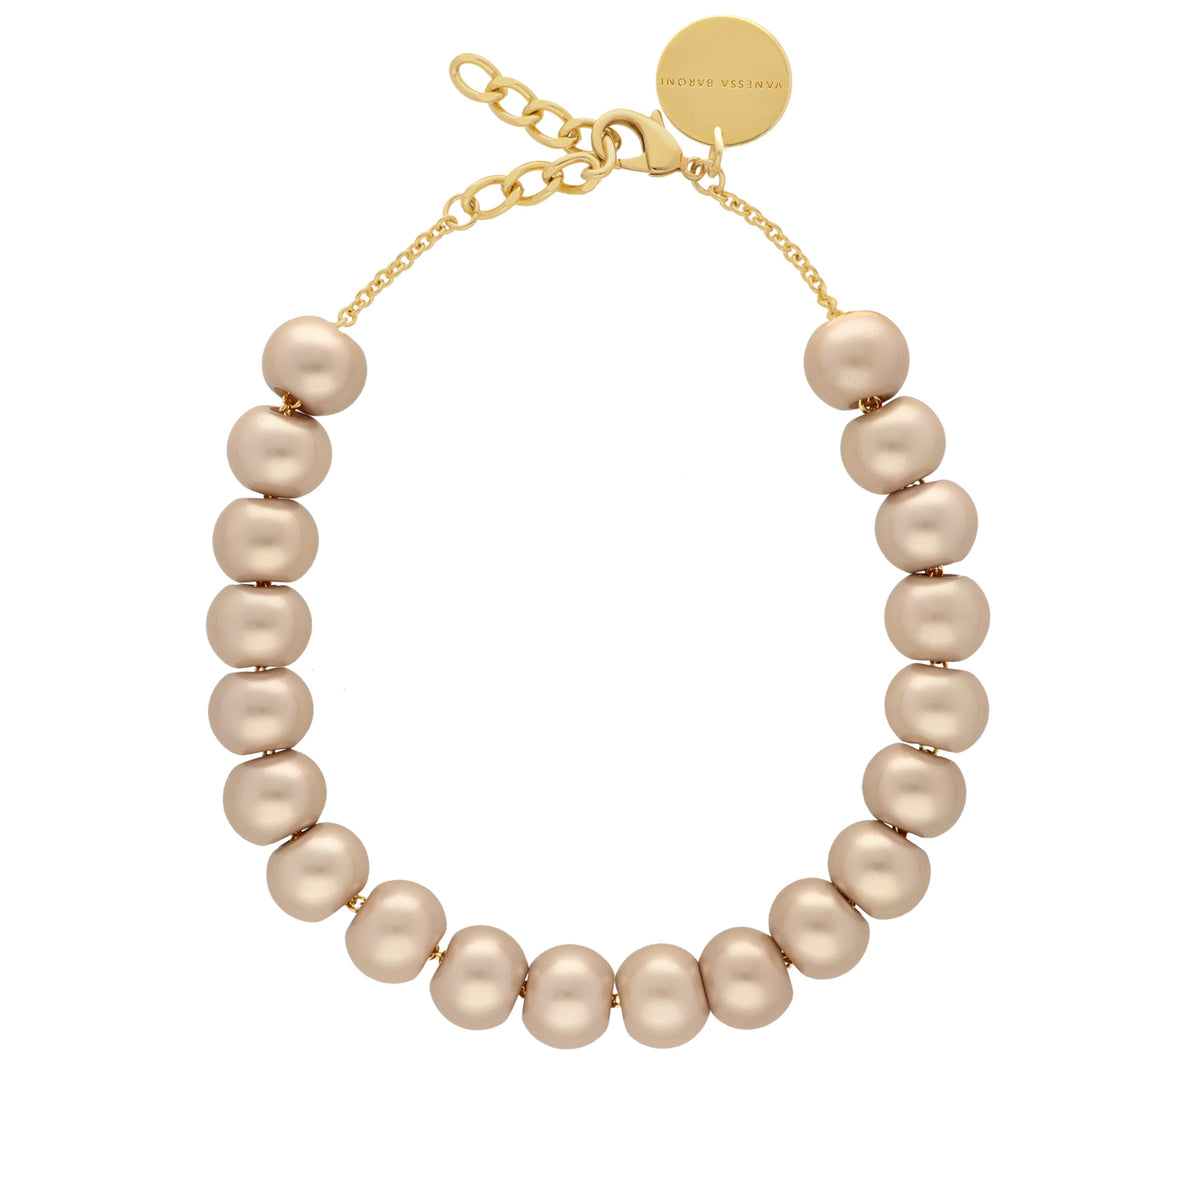 Small Beads Necklace Short Champagner Pearl